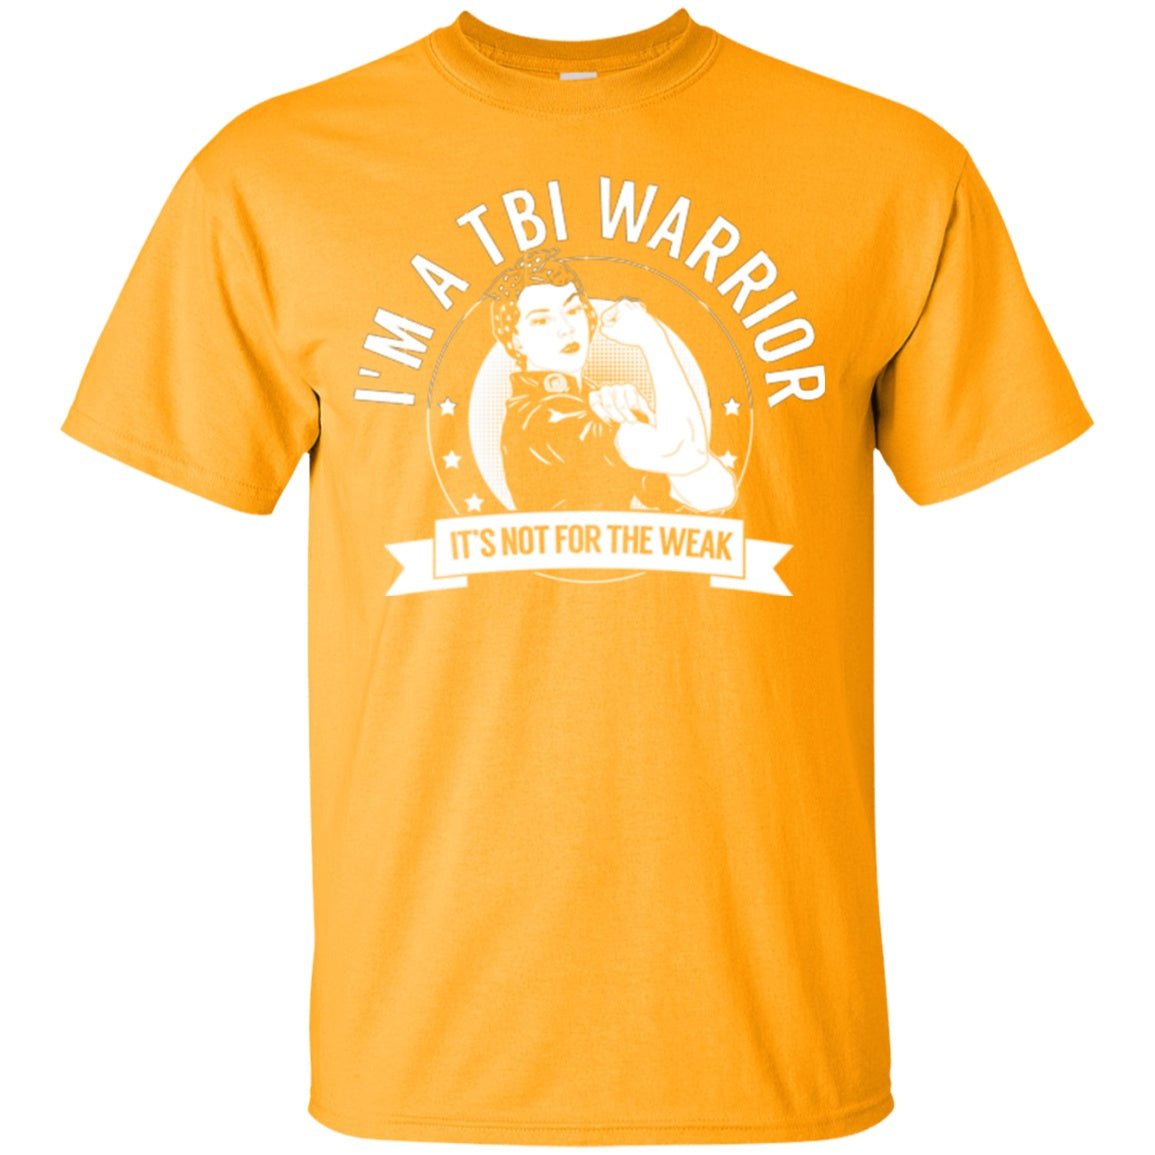 Traumatic Brain Injury - TBI Warrior Not For The Weak Cotton T-Shirt - The Unchargeables